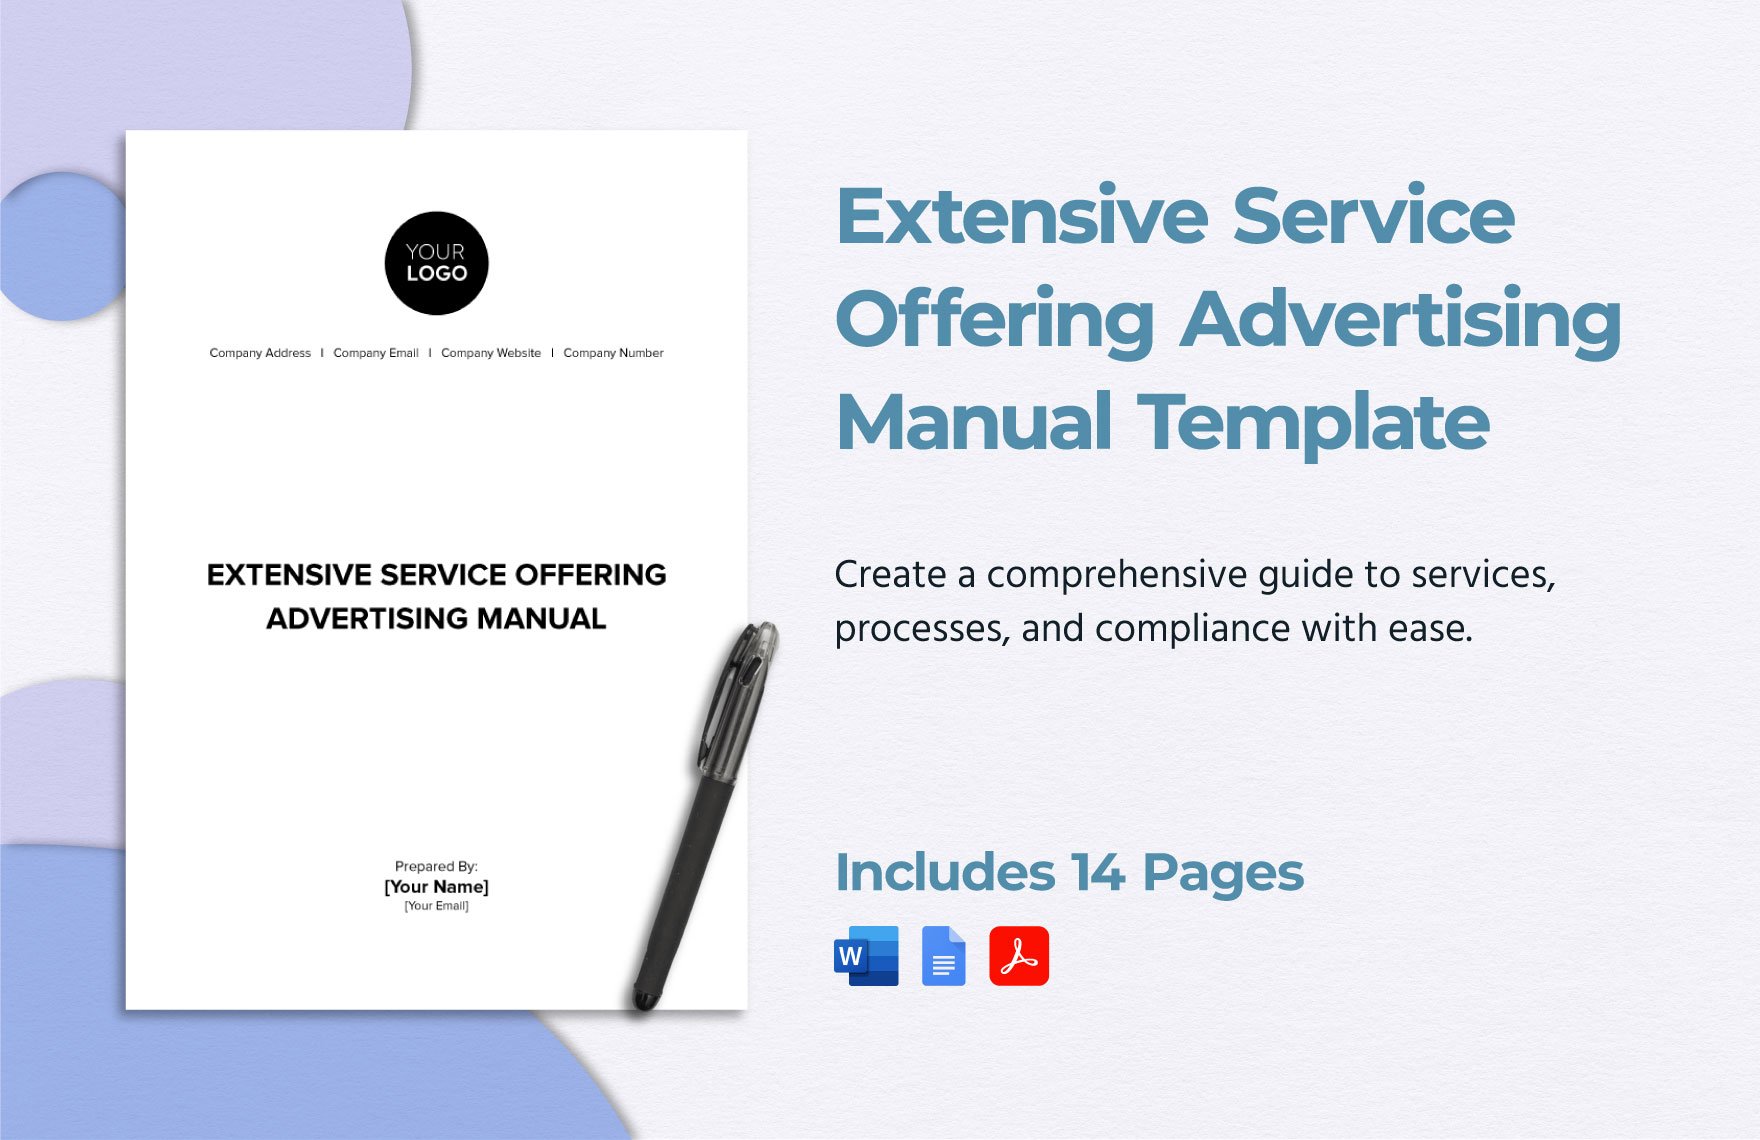 Extensive Service Offering Advertising Manual Template in Word, Google Docs, PDF